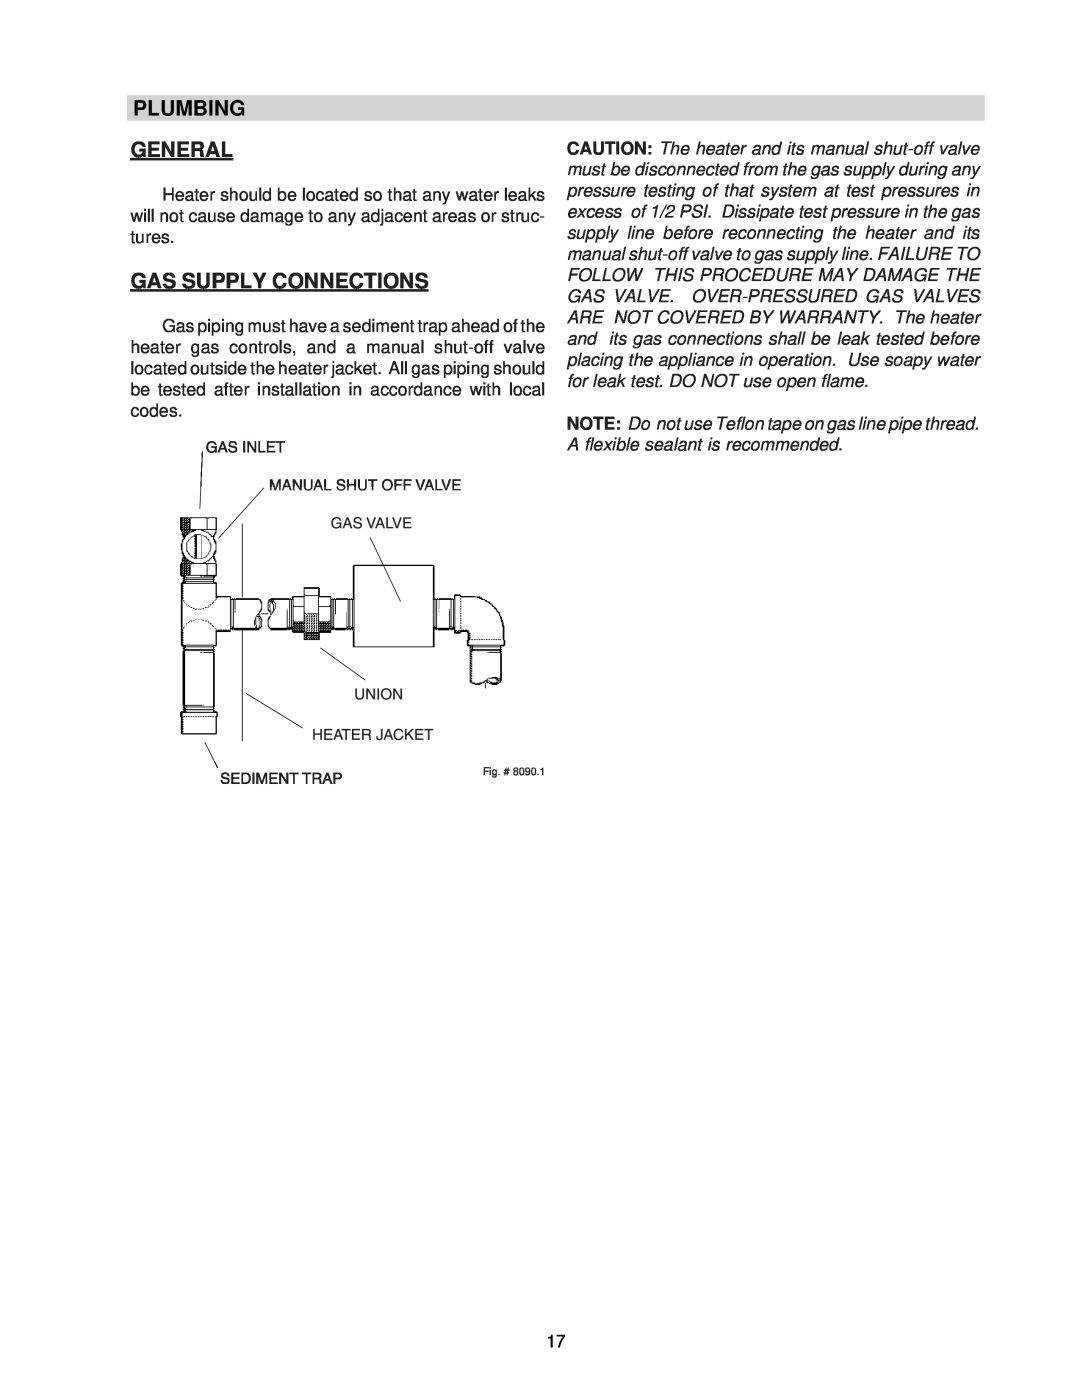 Raypak 0133-4001 manual Plumbing, General, Gas Supply Connections 